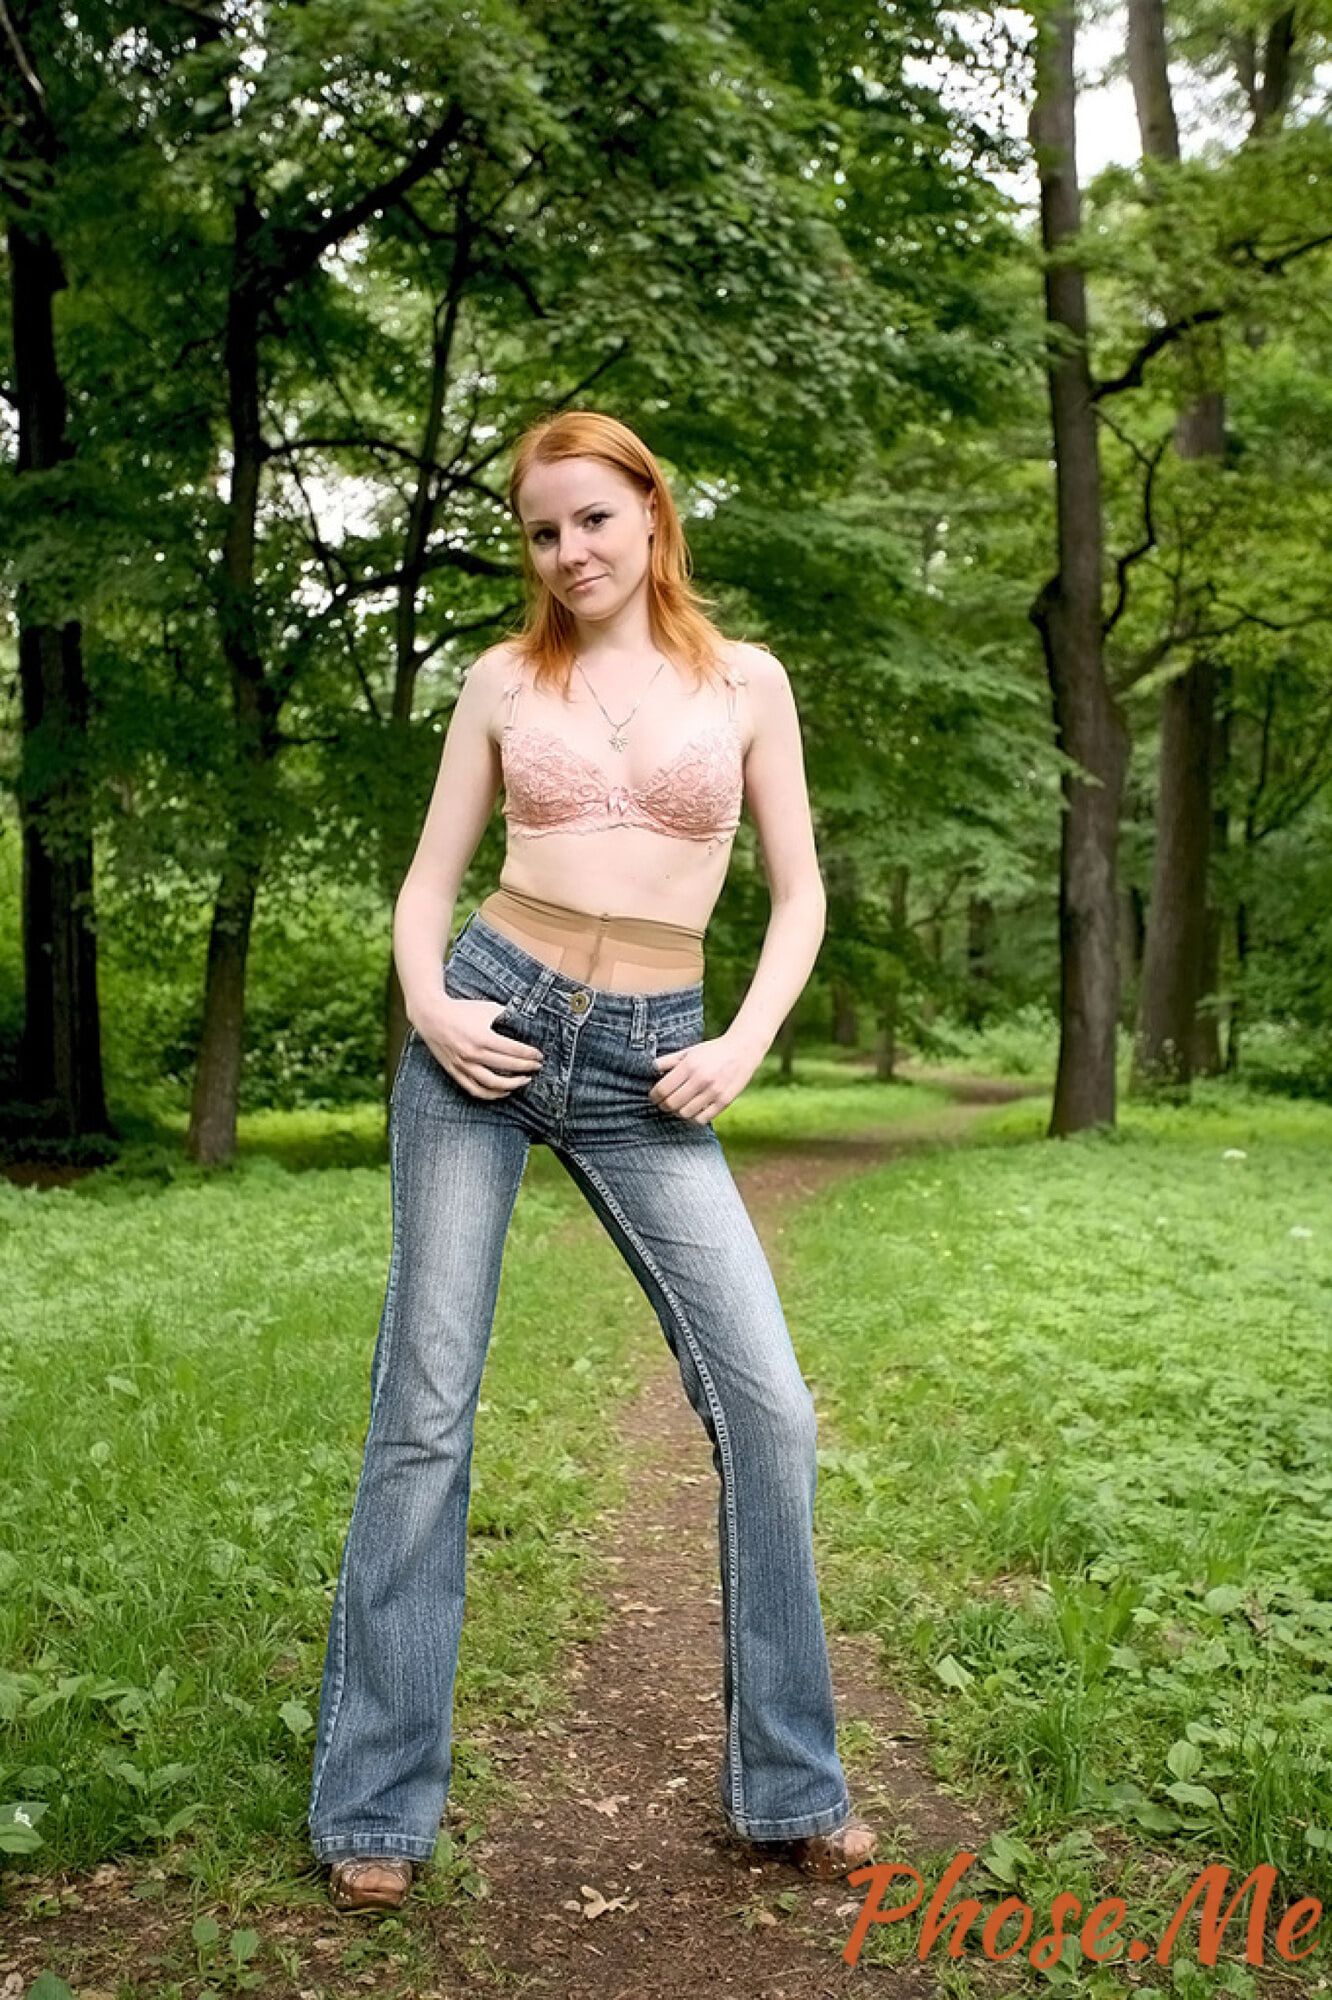 Sexy Redhead Strips Out Of jeans In Forest